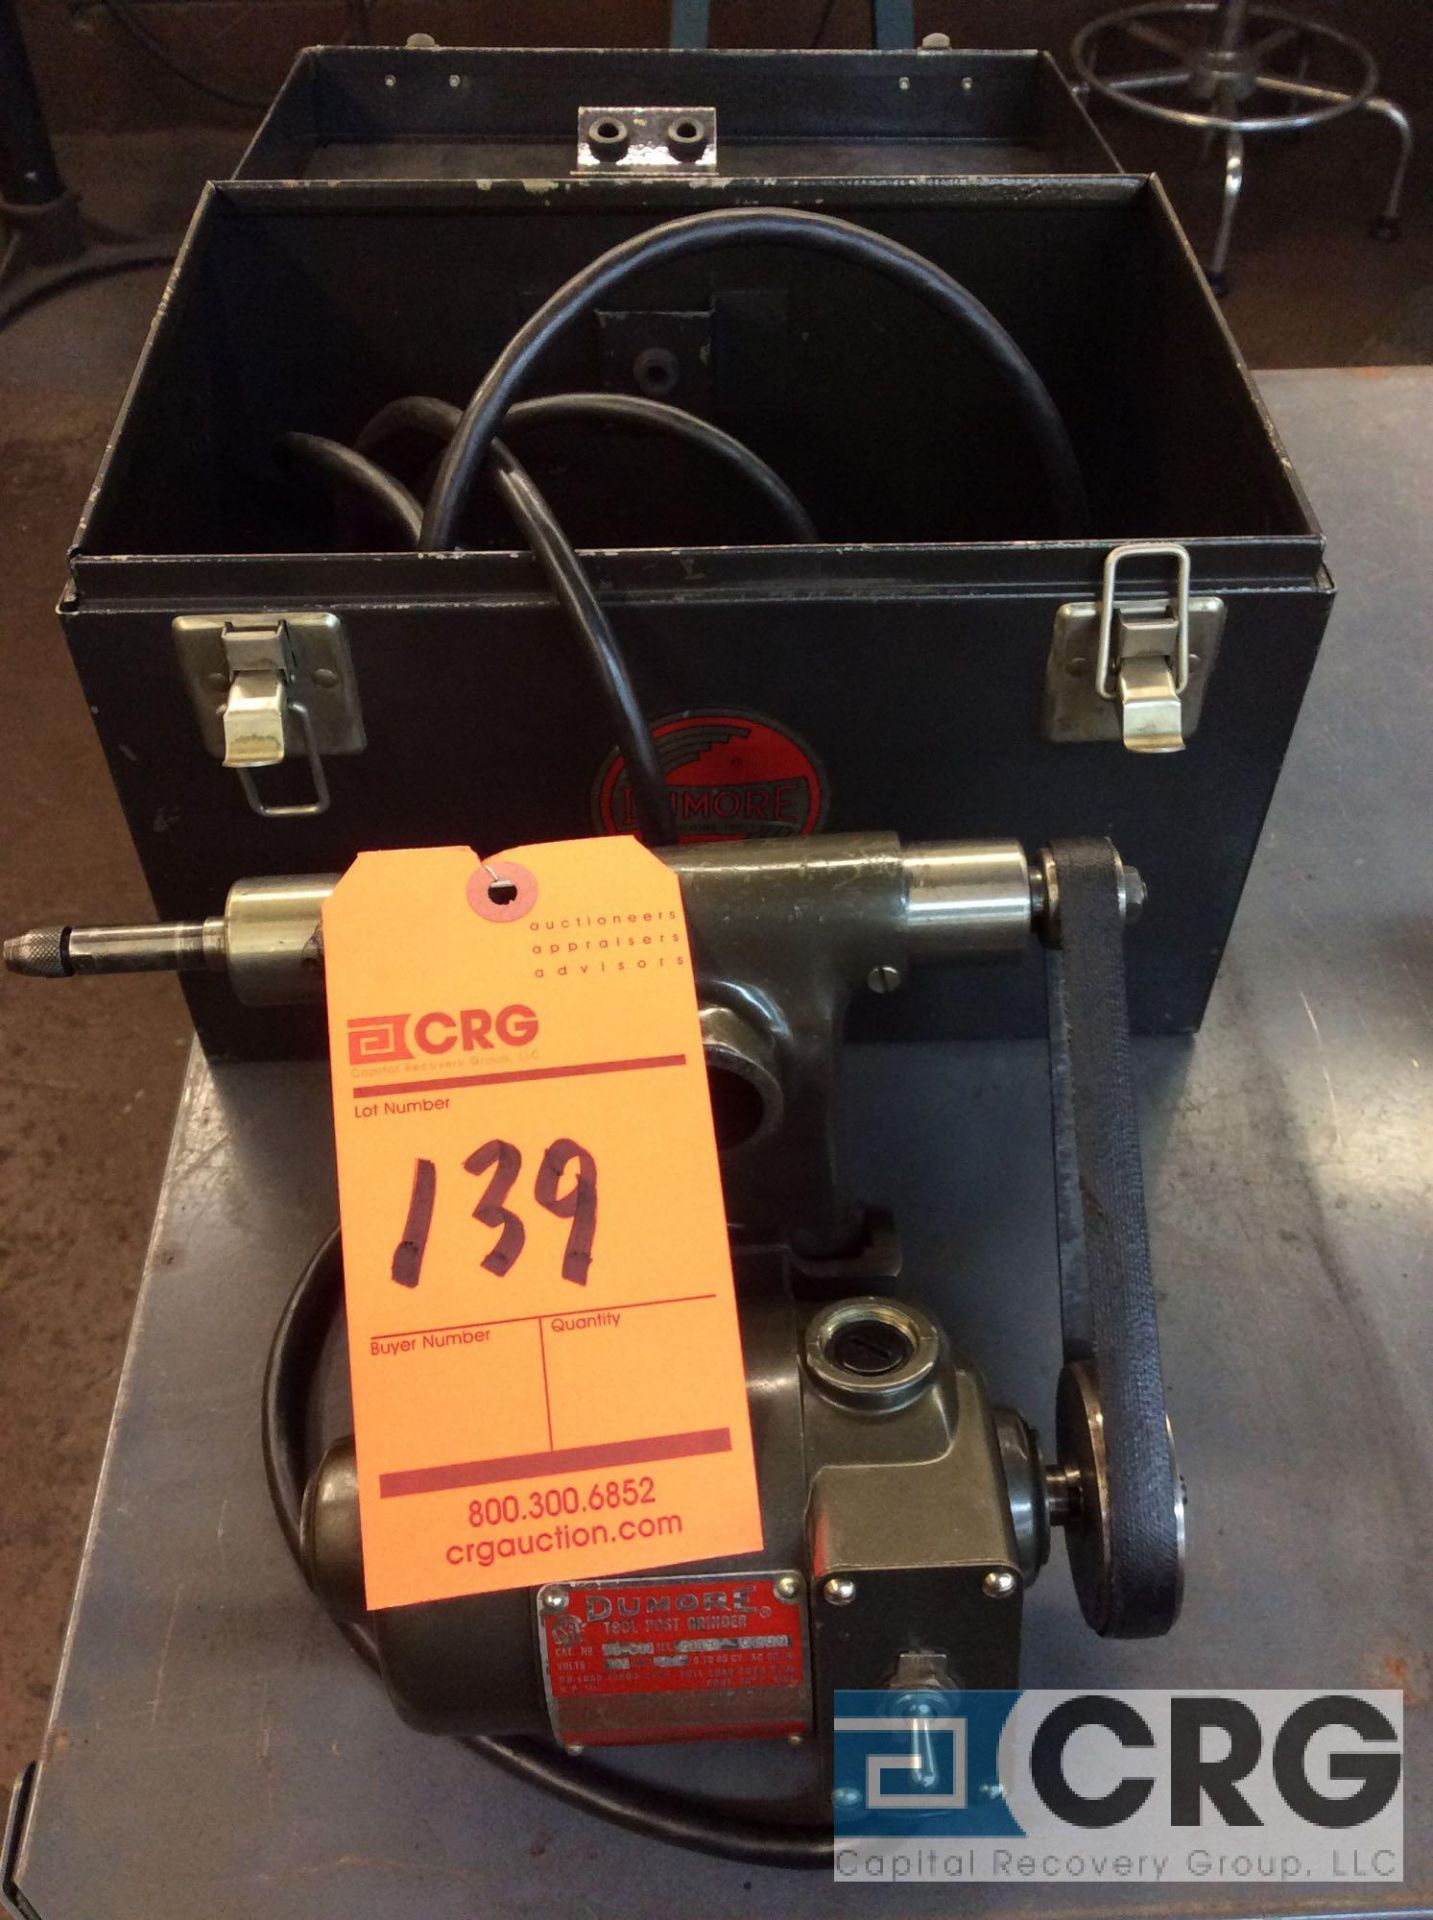 Dumore tool post grinder, mn 11-011, 1/5 HP, 1 phase with steel case (LOCATED IN TOOL ROOM MACHINE